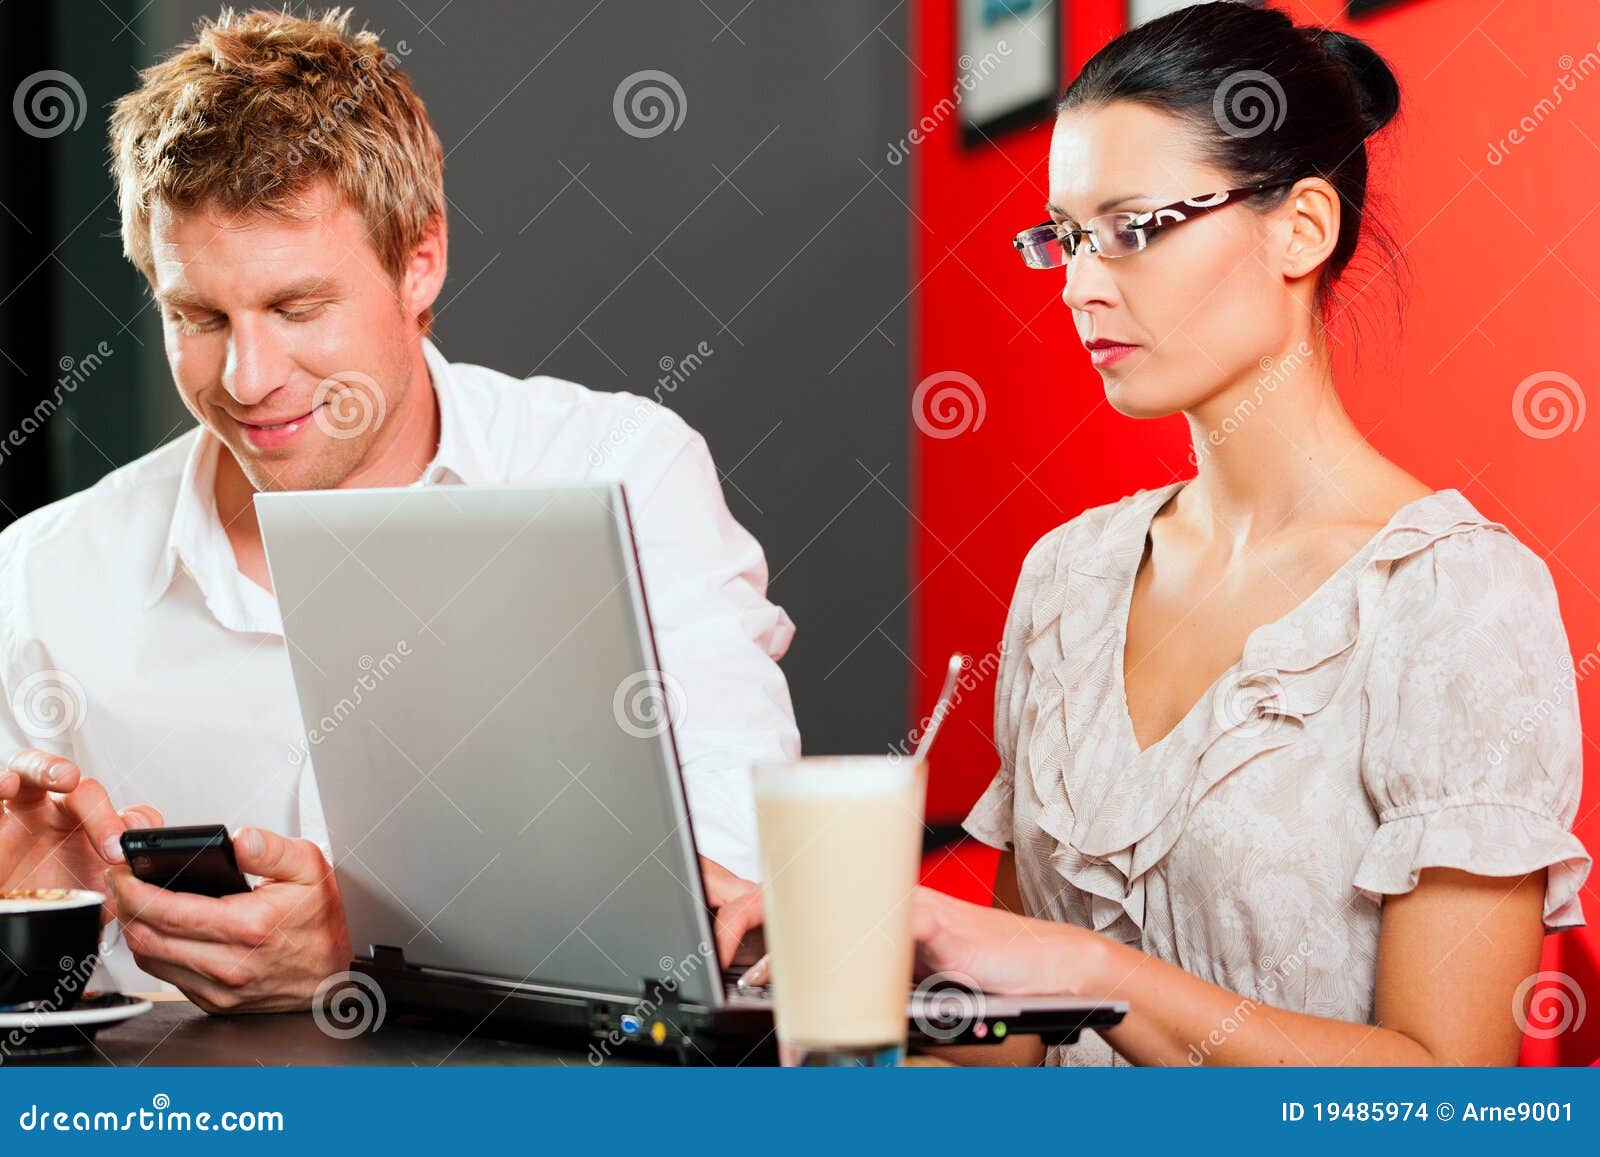 couple in coffeeshop with laptop and mobile